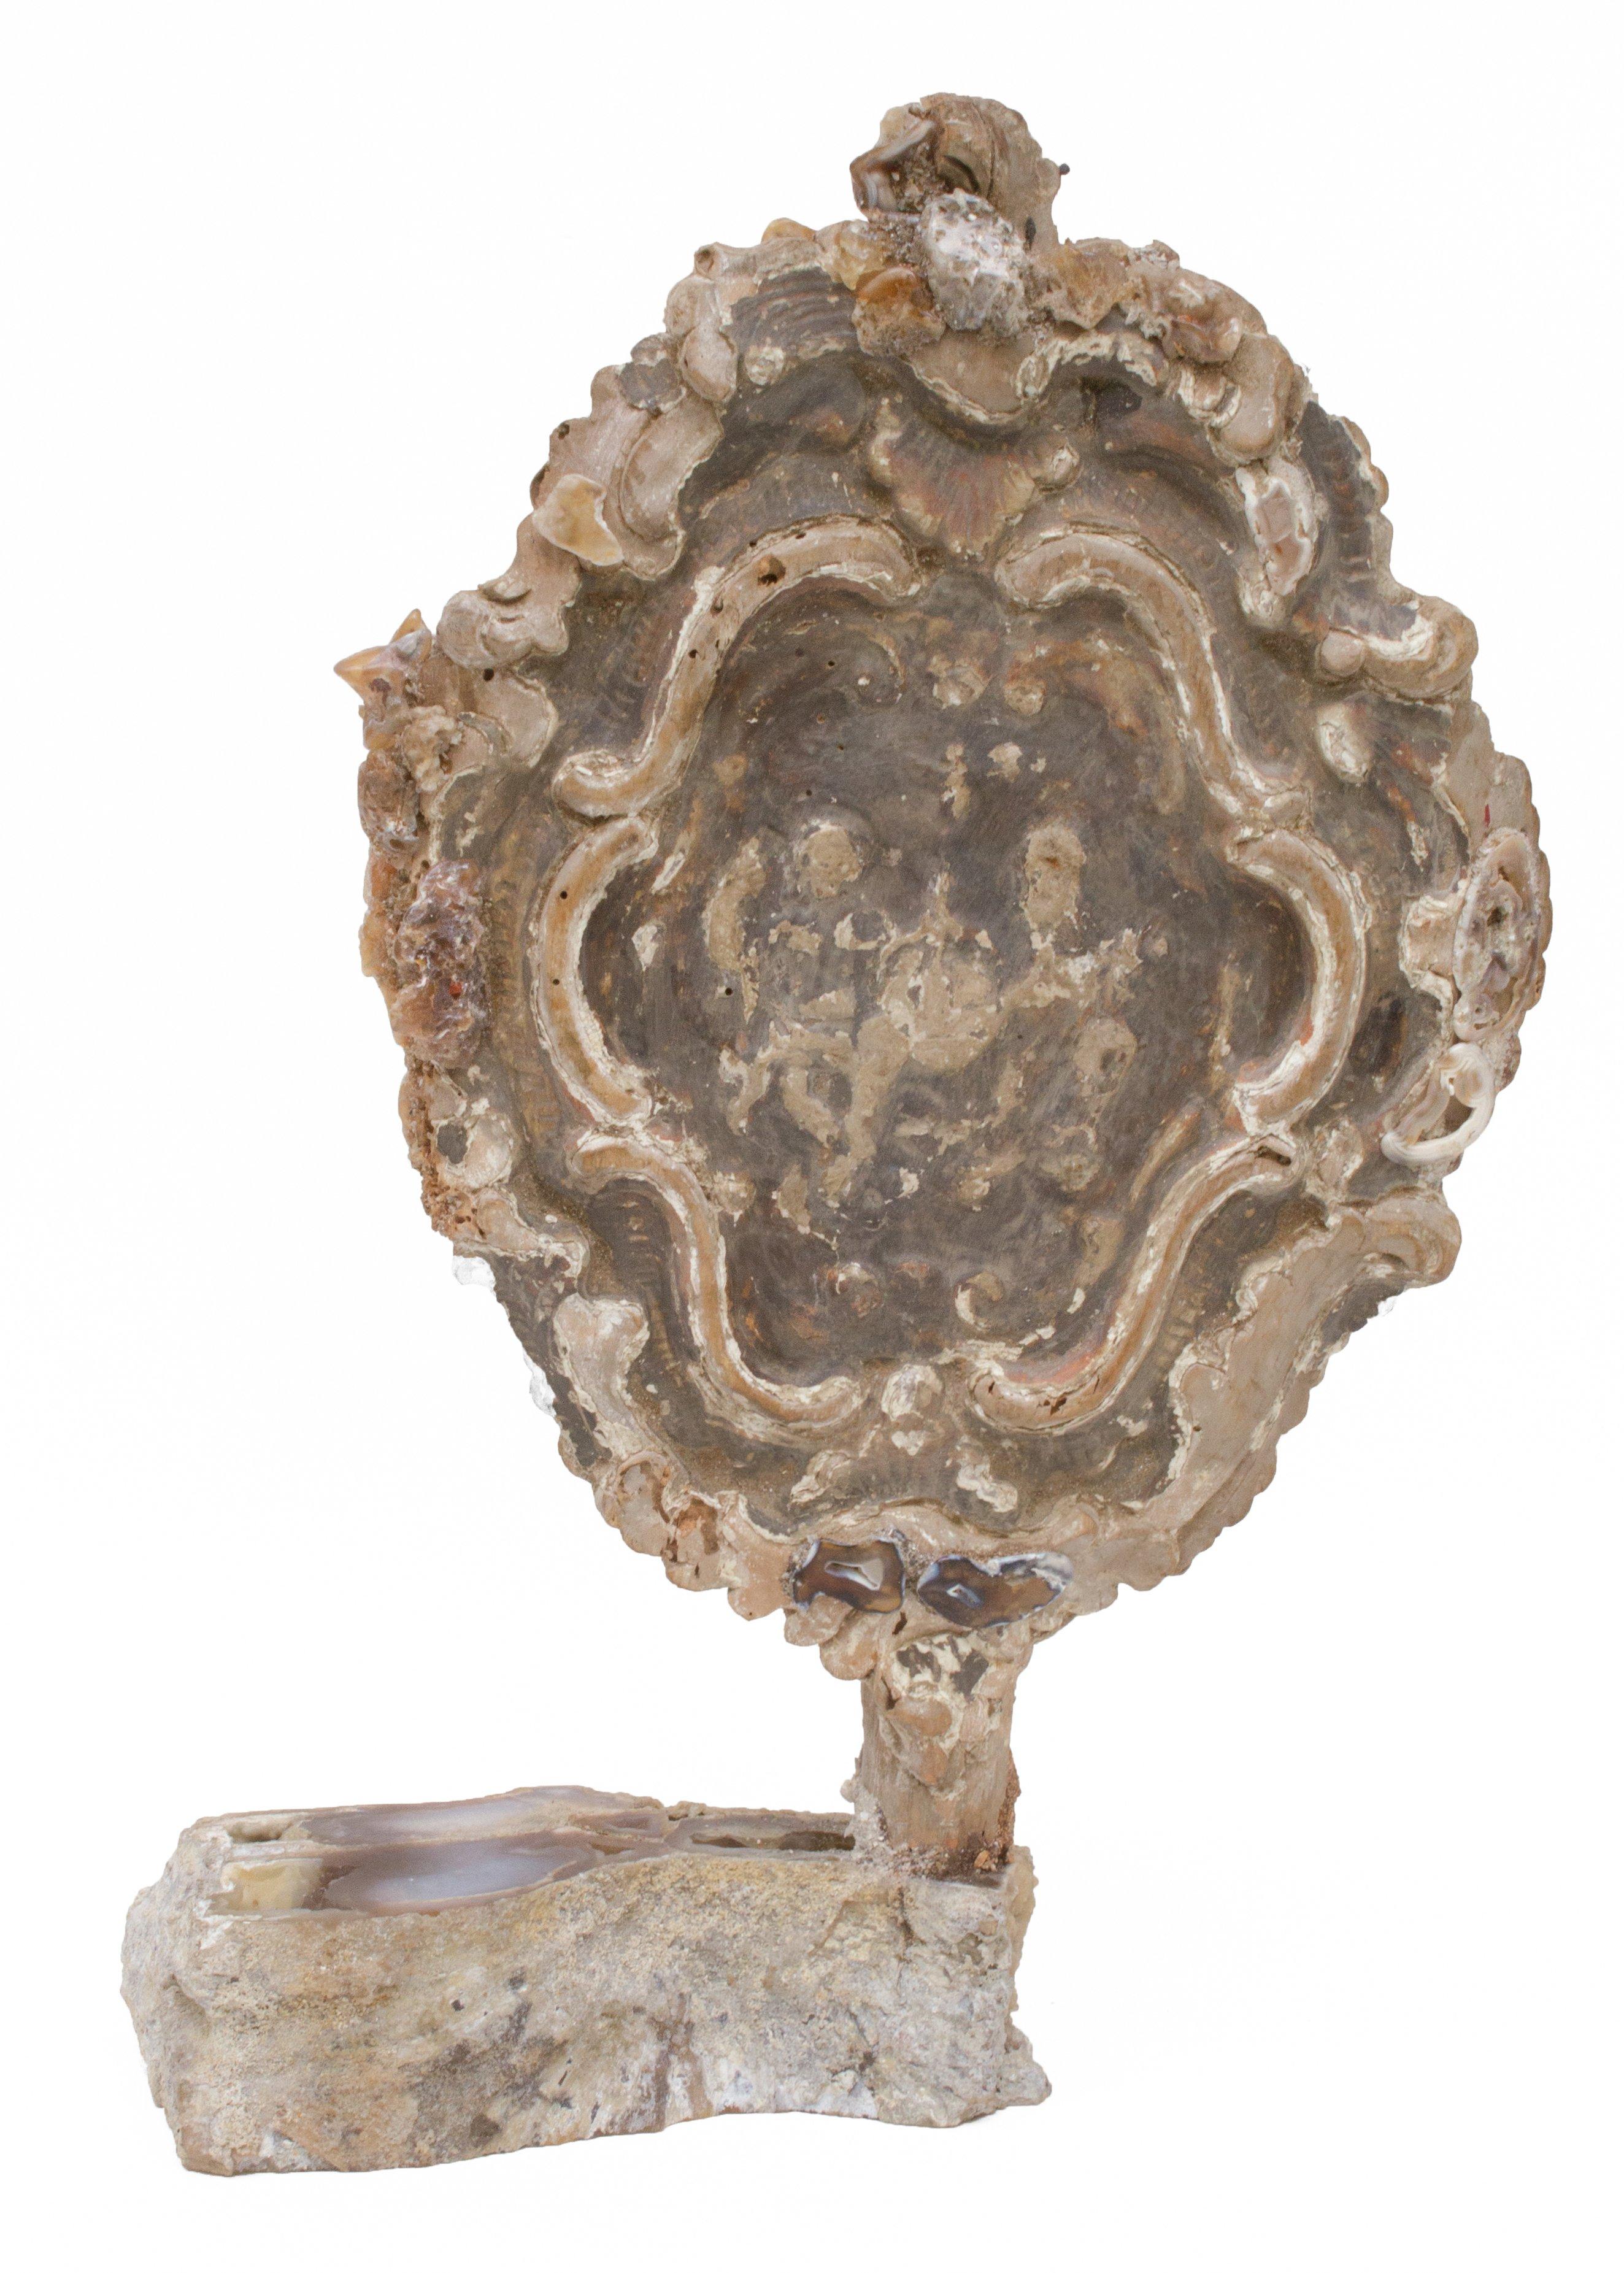 Rococo 18th Century Italian Processional Finial with Polished Agate Coral on an Agate For Sale